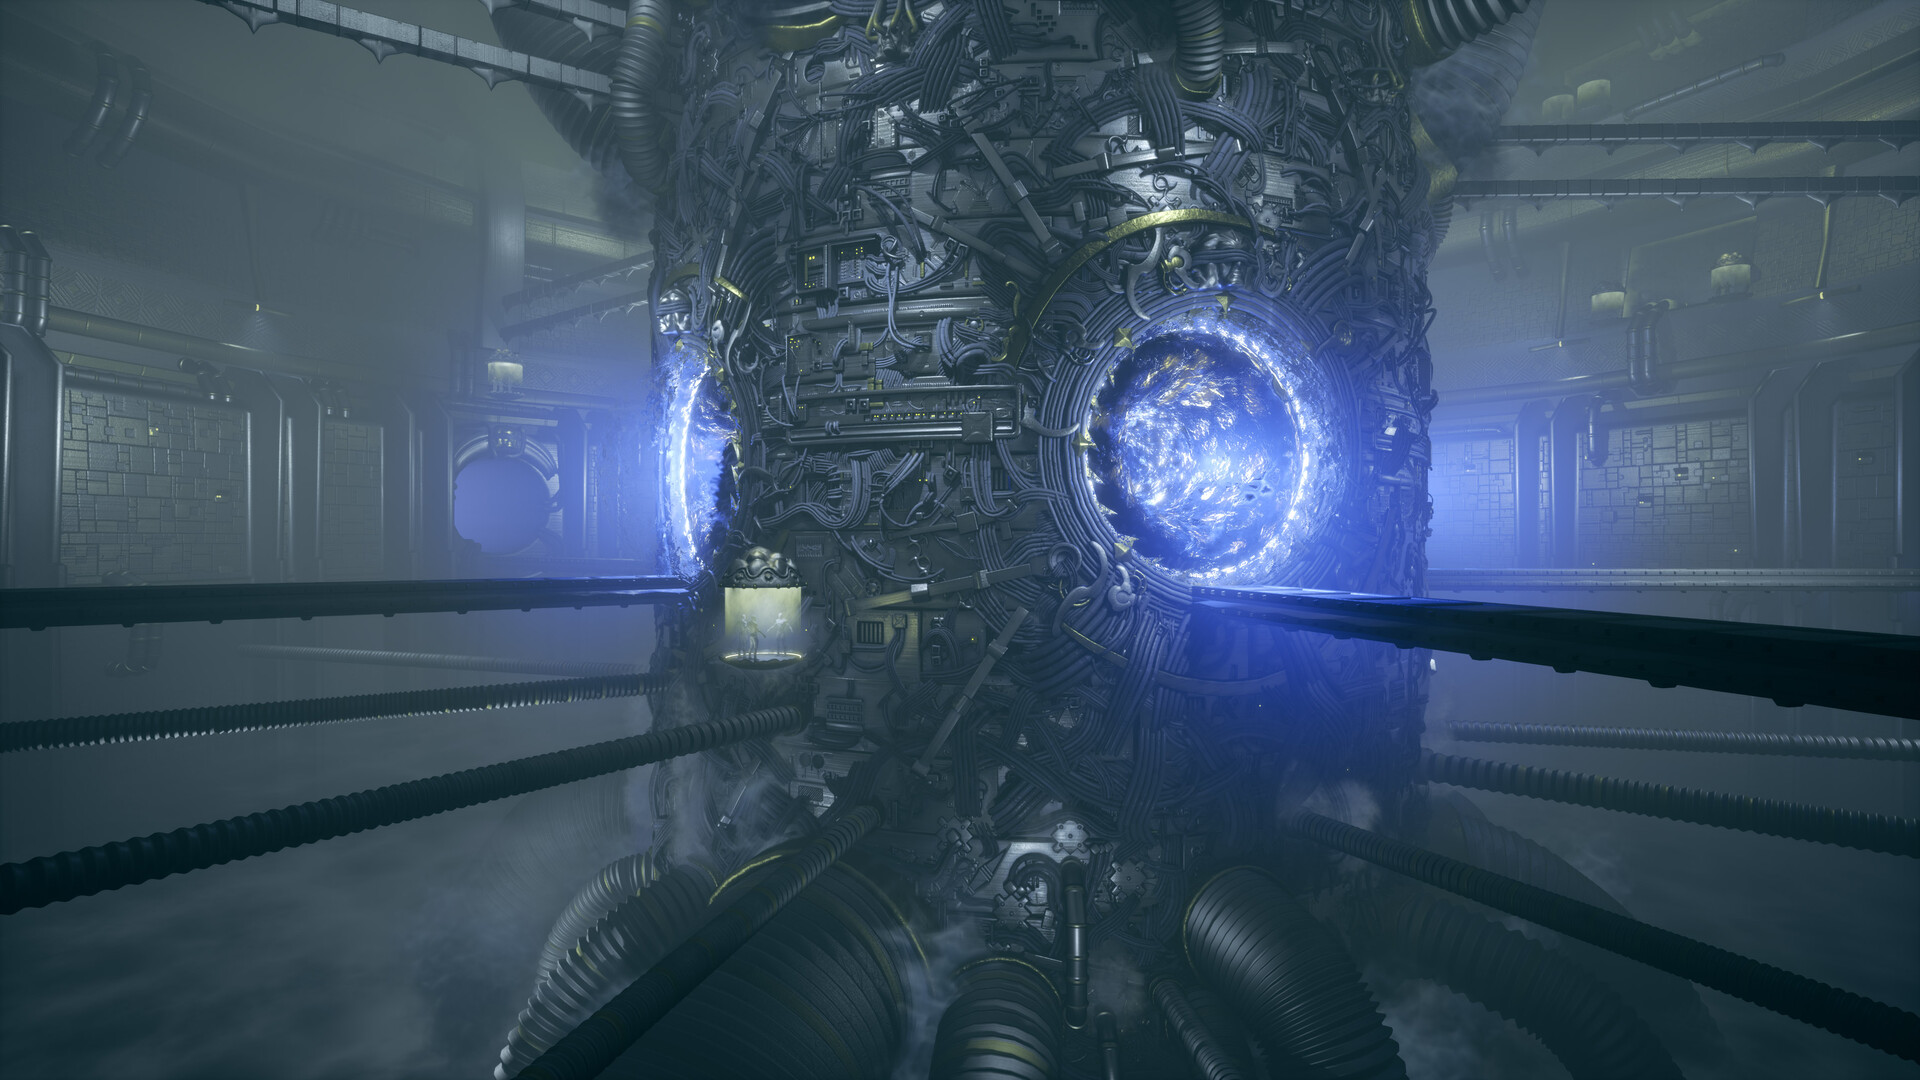 Main camera angle from Unreal, showing the cylindrical mega-structure and its portals. When compared to the previous post, the blue glow from the gates and the VFX for the portals is much more powerful. The piping on the ceiling and the floor now also give off smoke and vapour VFX, showcasing radical changes in temperature.